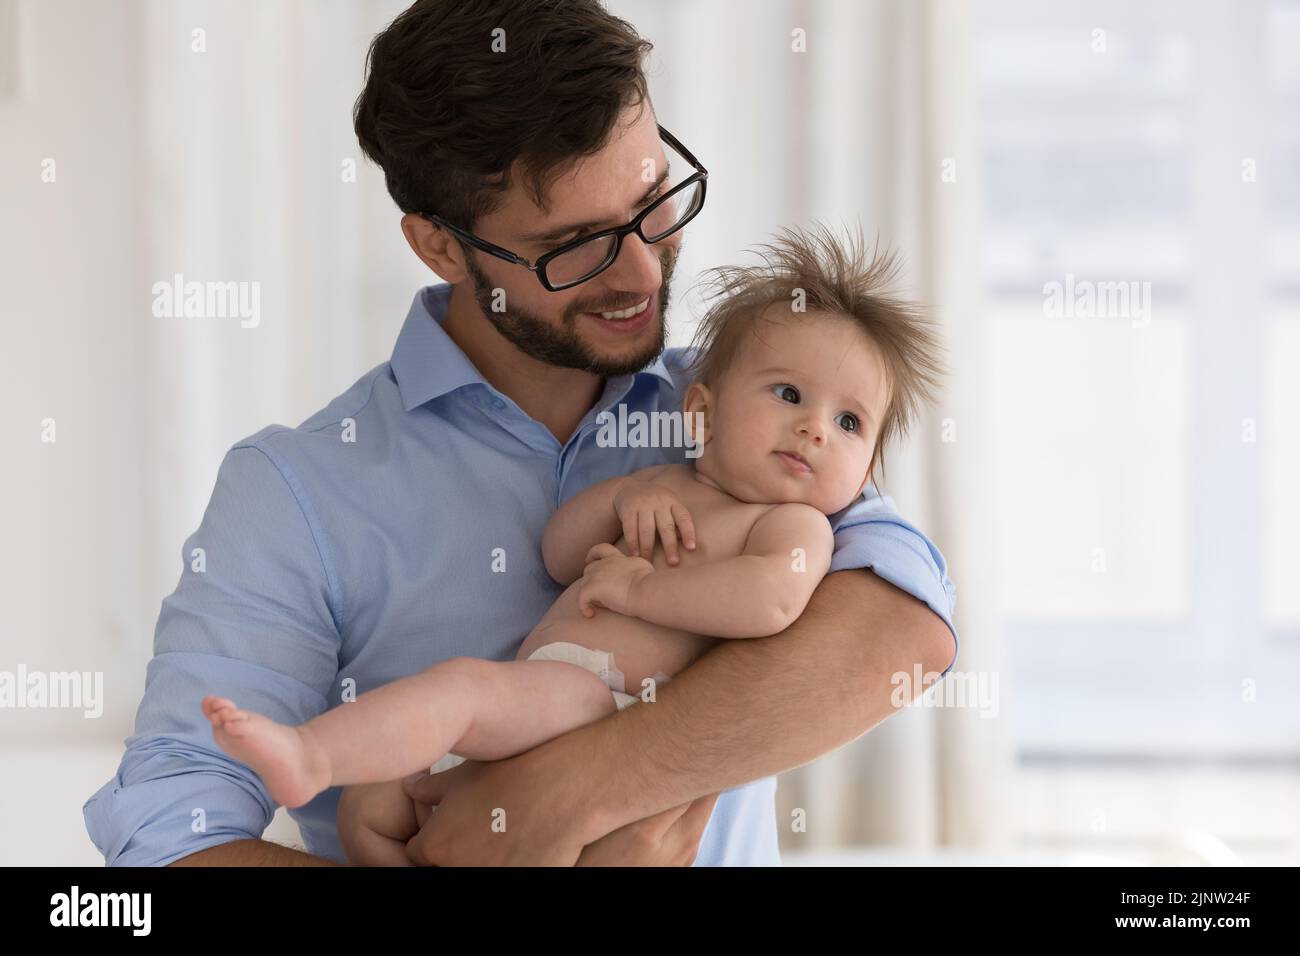 Young father cuddling his sweet newborn baby in diaper Stock Photo